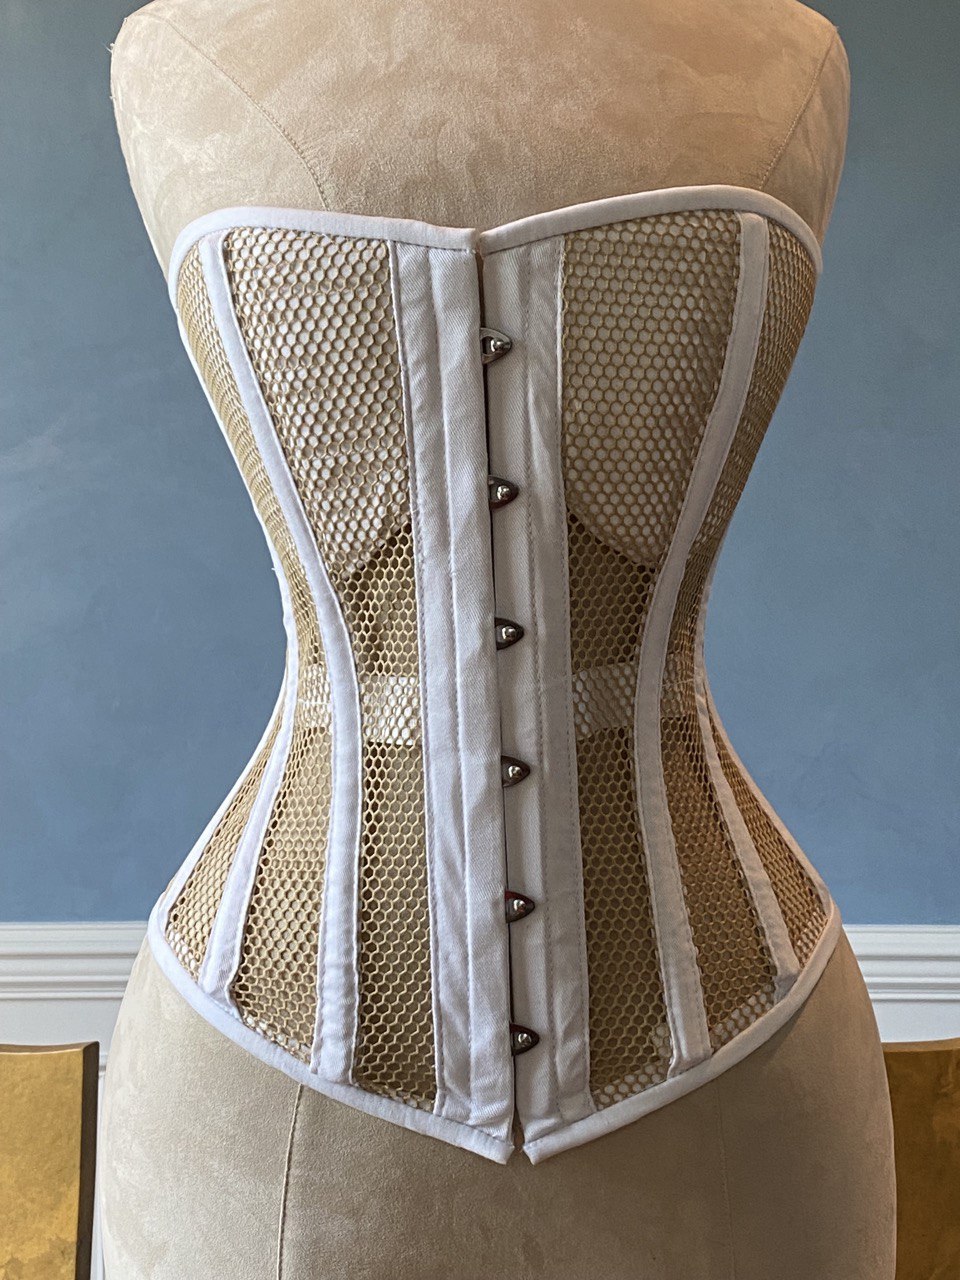 Overbust mesh authentic corset with cups. Gothic Victorian, steampunk affordable, plus size Corsettery